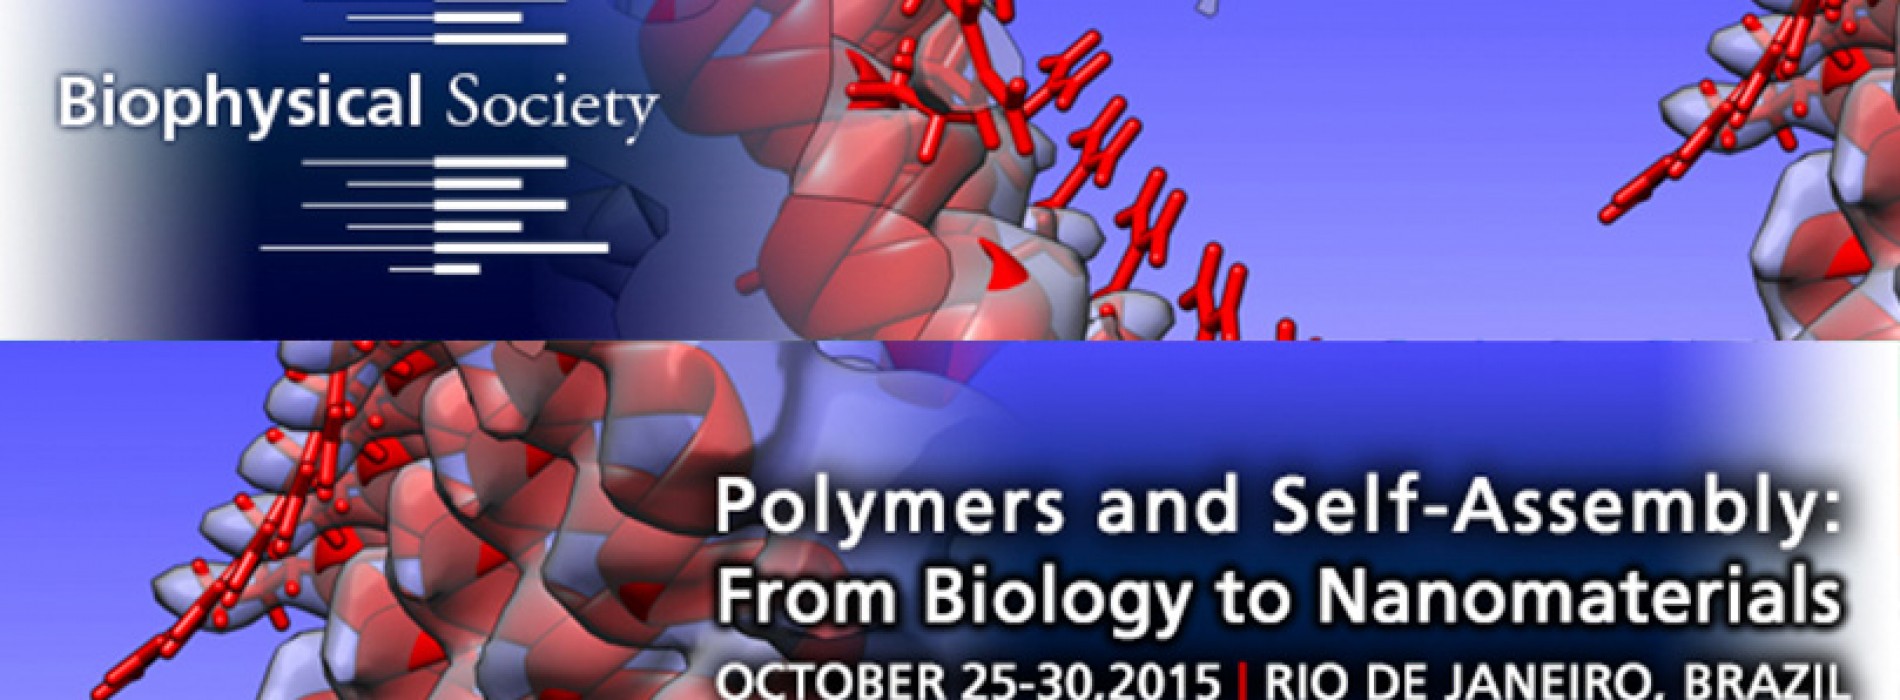 Polymers and Self-Assembly: From Biology to Nanomaterials